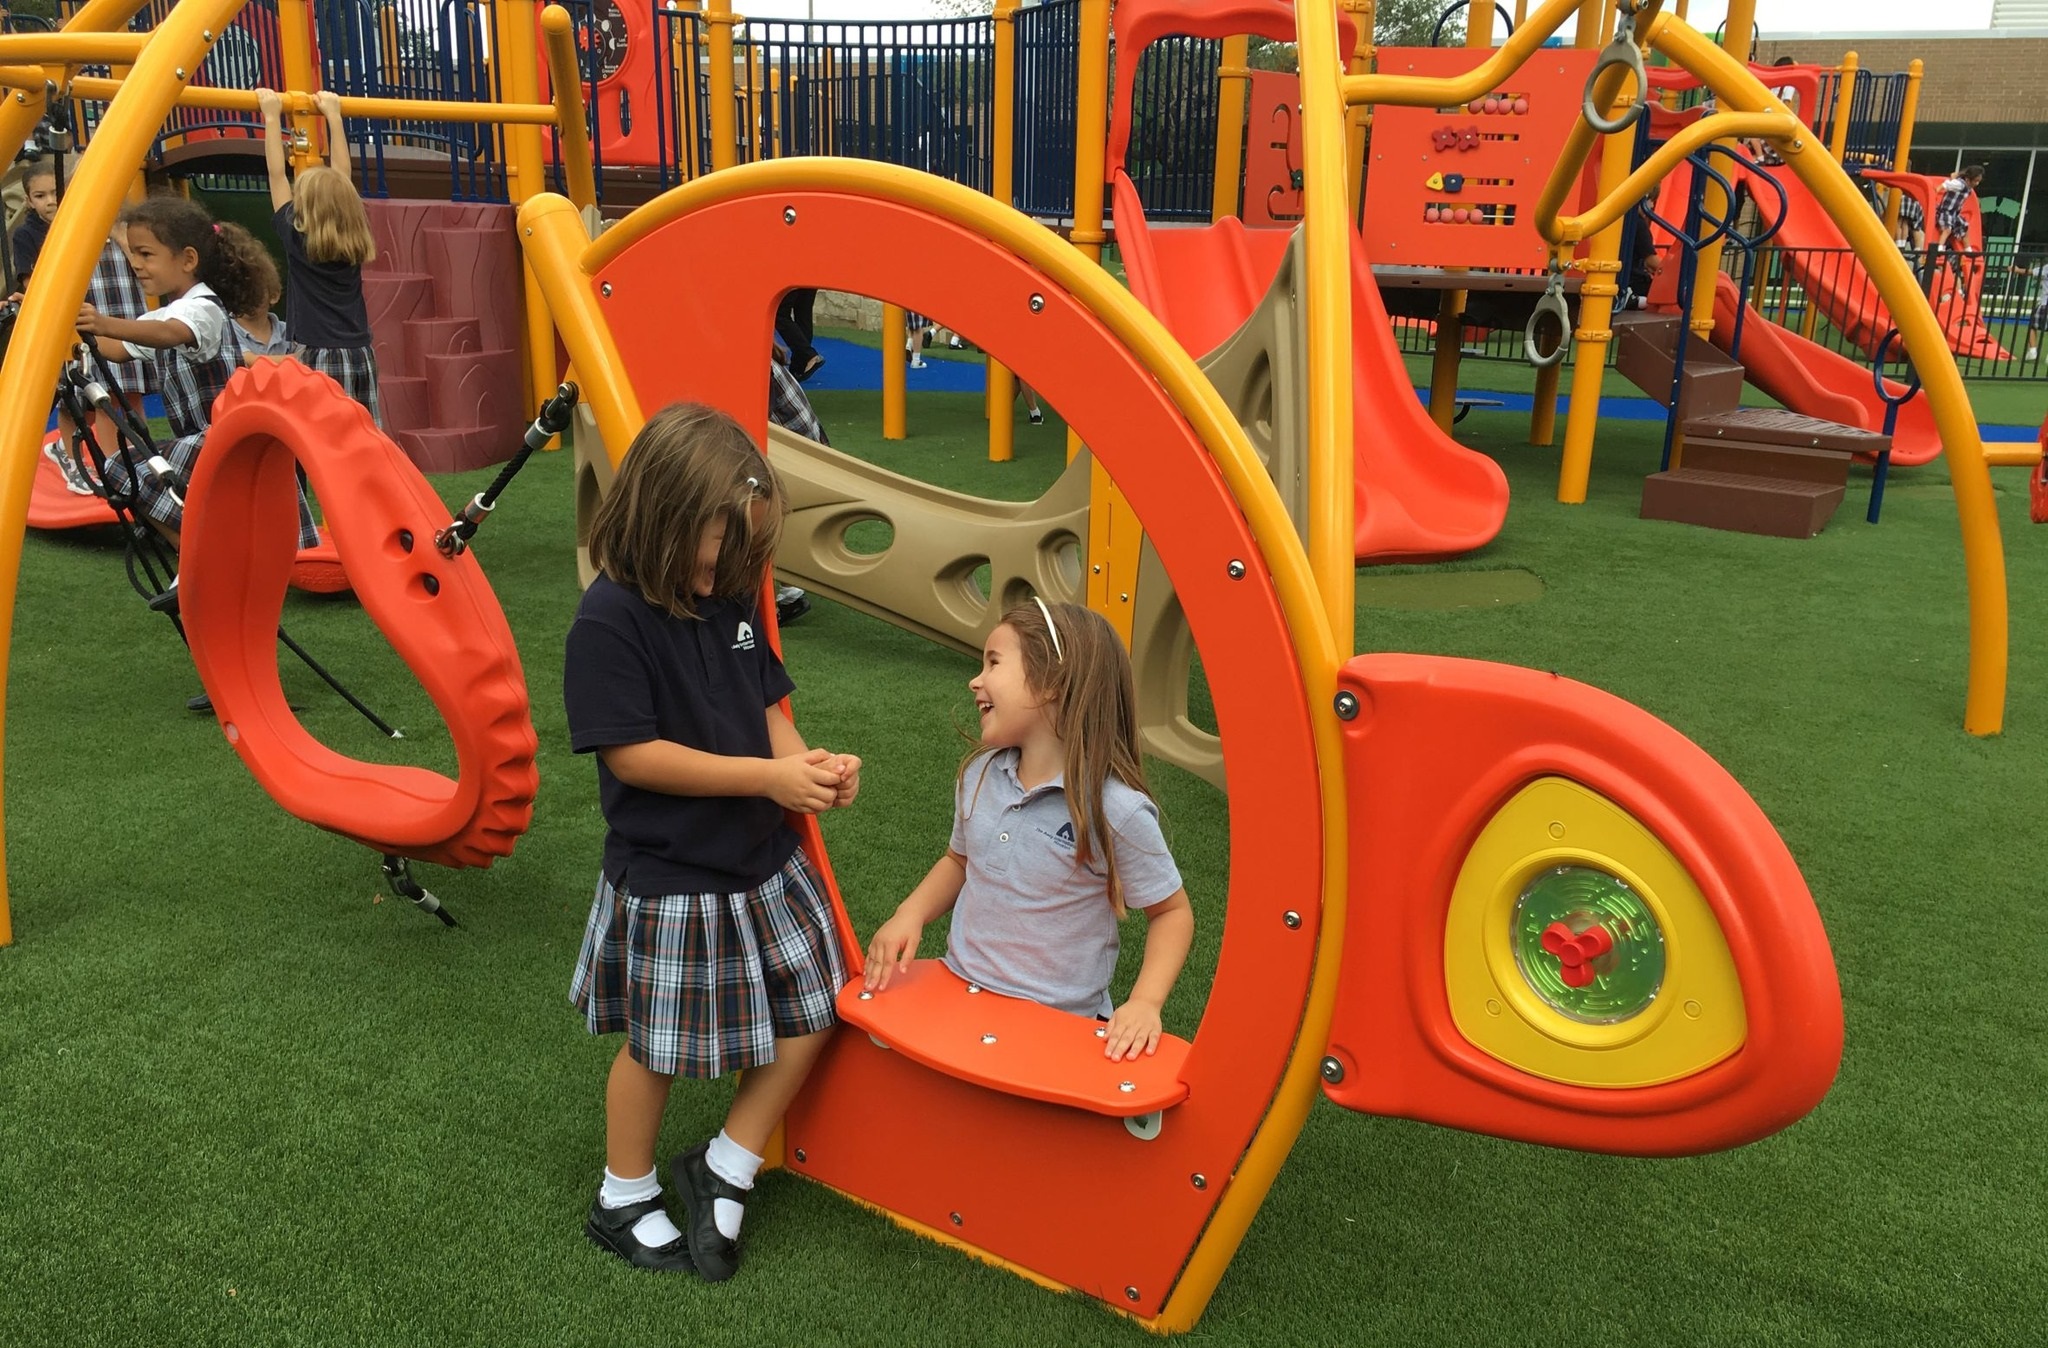 Importance of playgrounds for children’s therapy